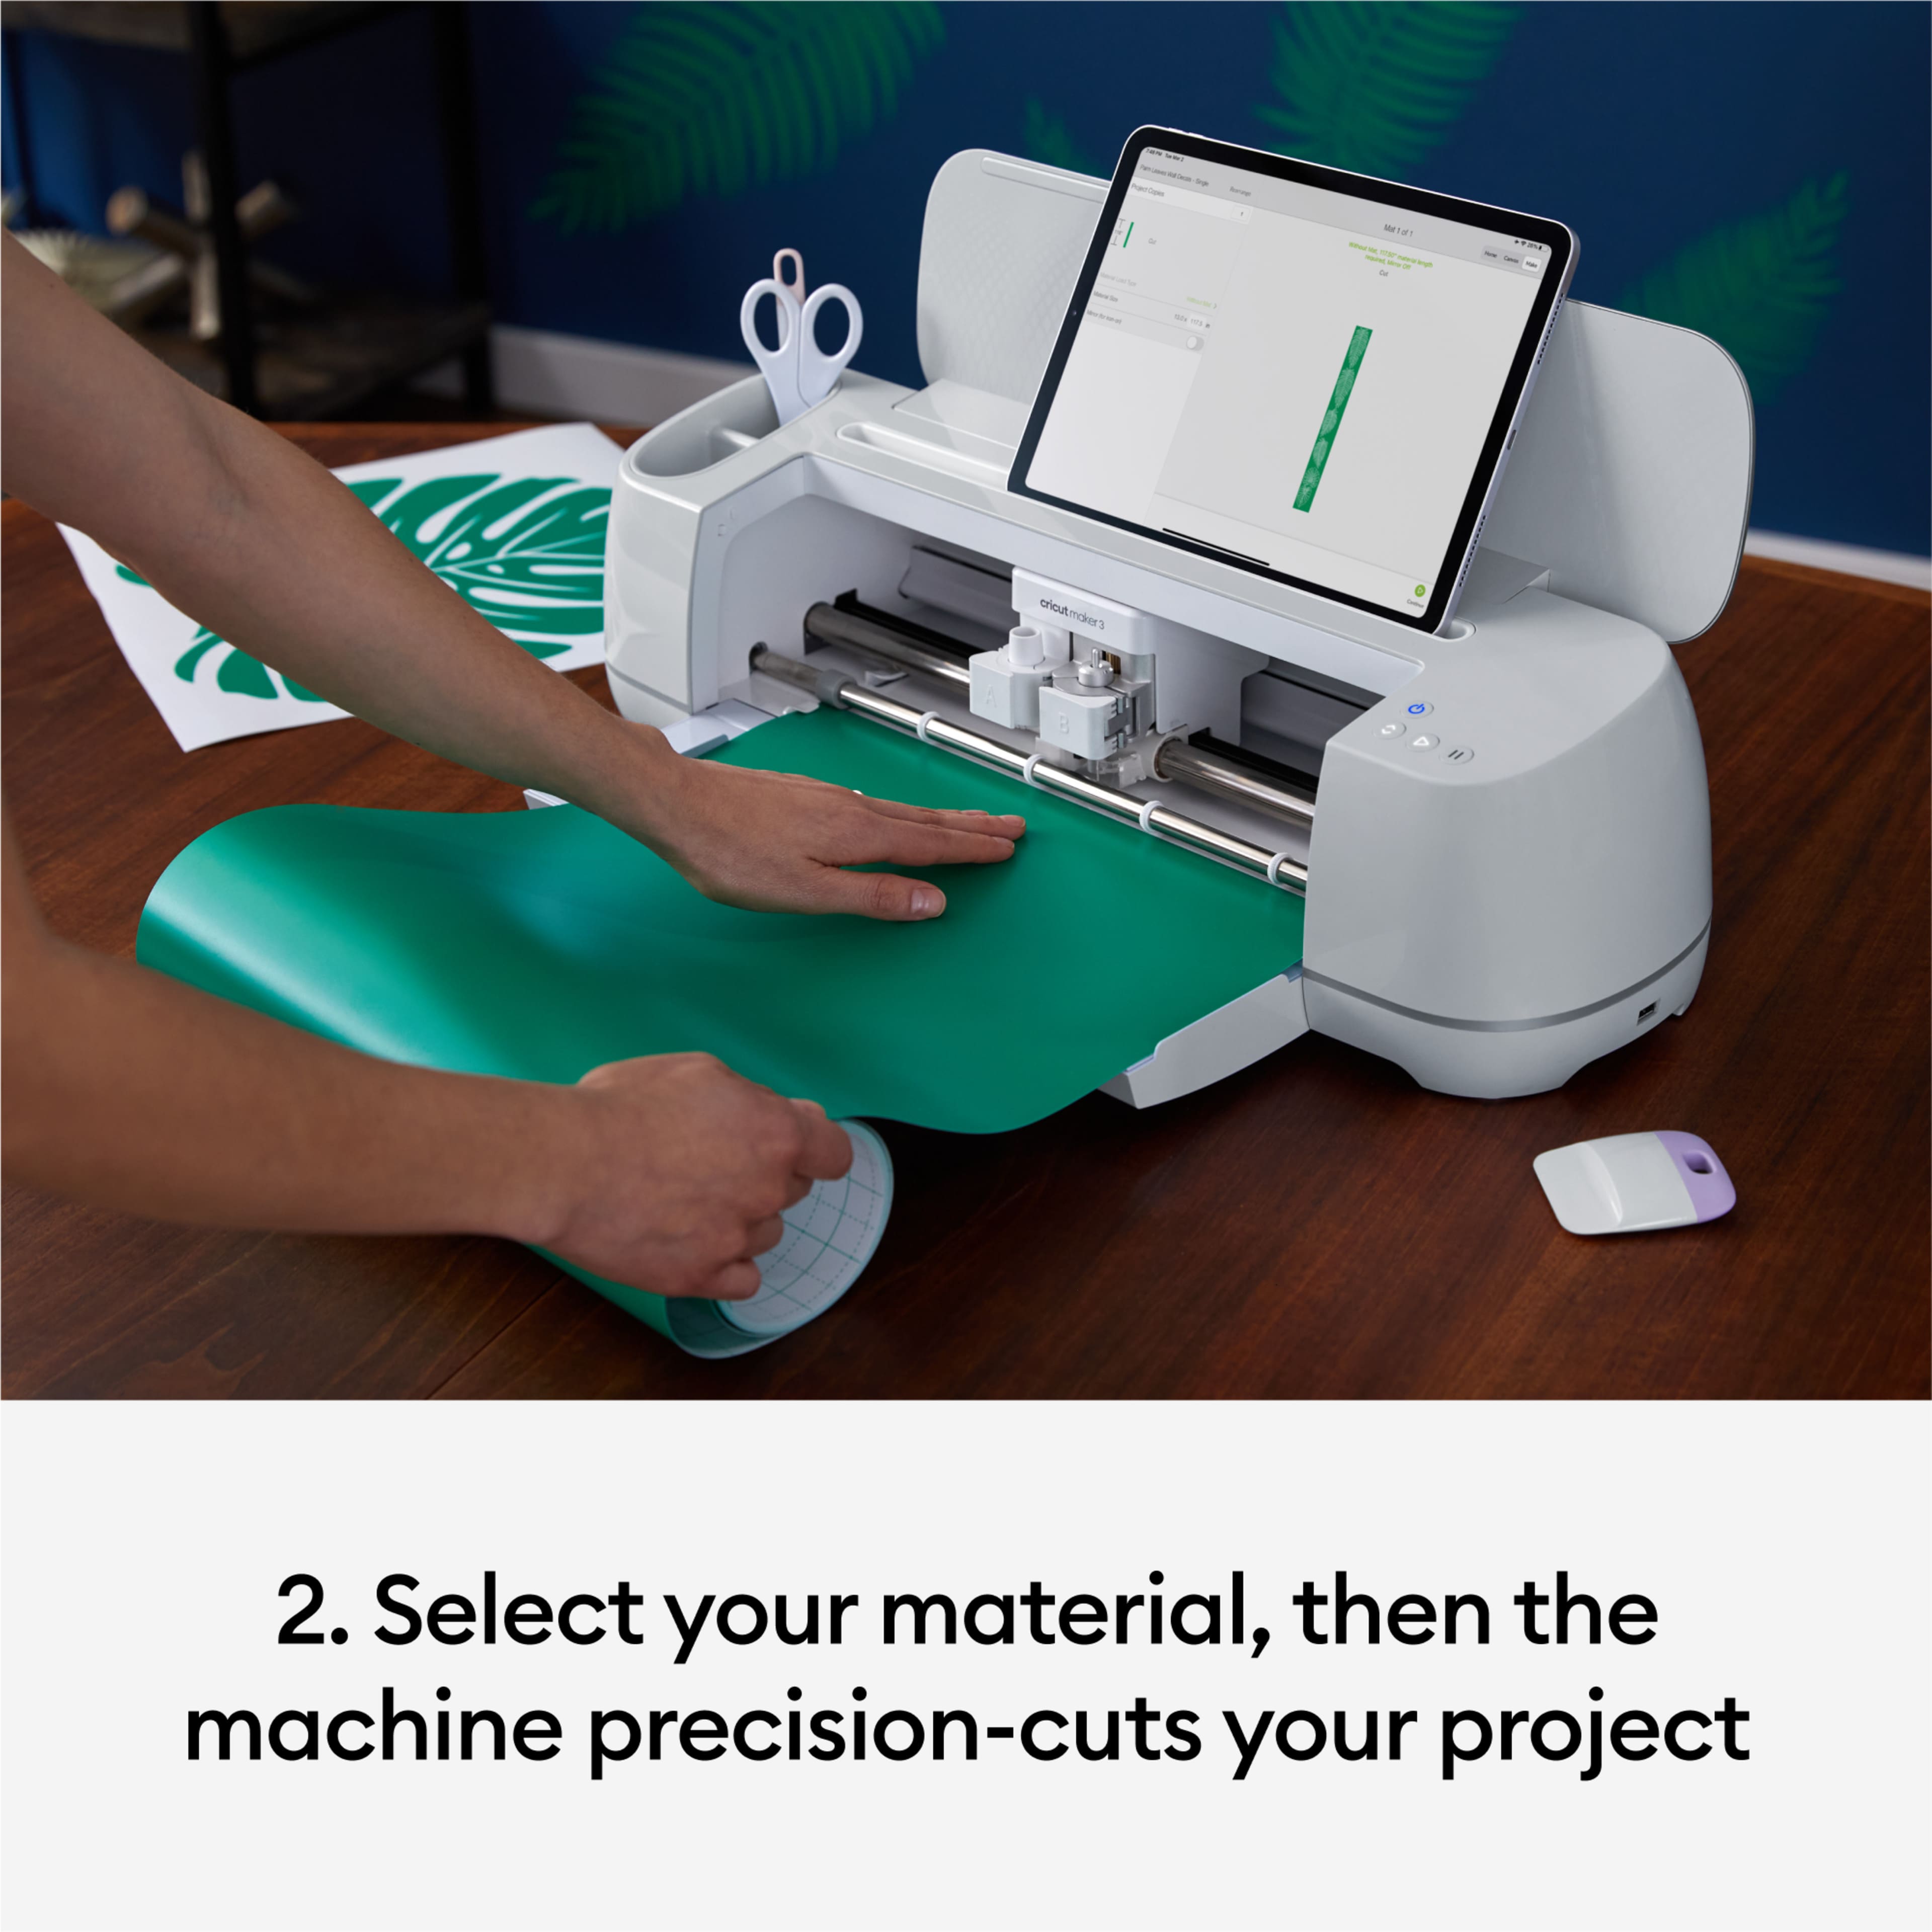  Cricut Maker 3 Machine Smart Vinyl & Iron On Bundle DIY Matless  Cutting 10X Force, 2X Faster, Cuts 300+ Materials, Compatible with iOS,  Android, Windows & Mac, Bluetooth Connectivity, Beginner Pro